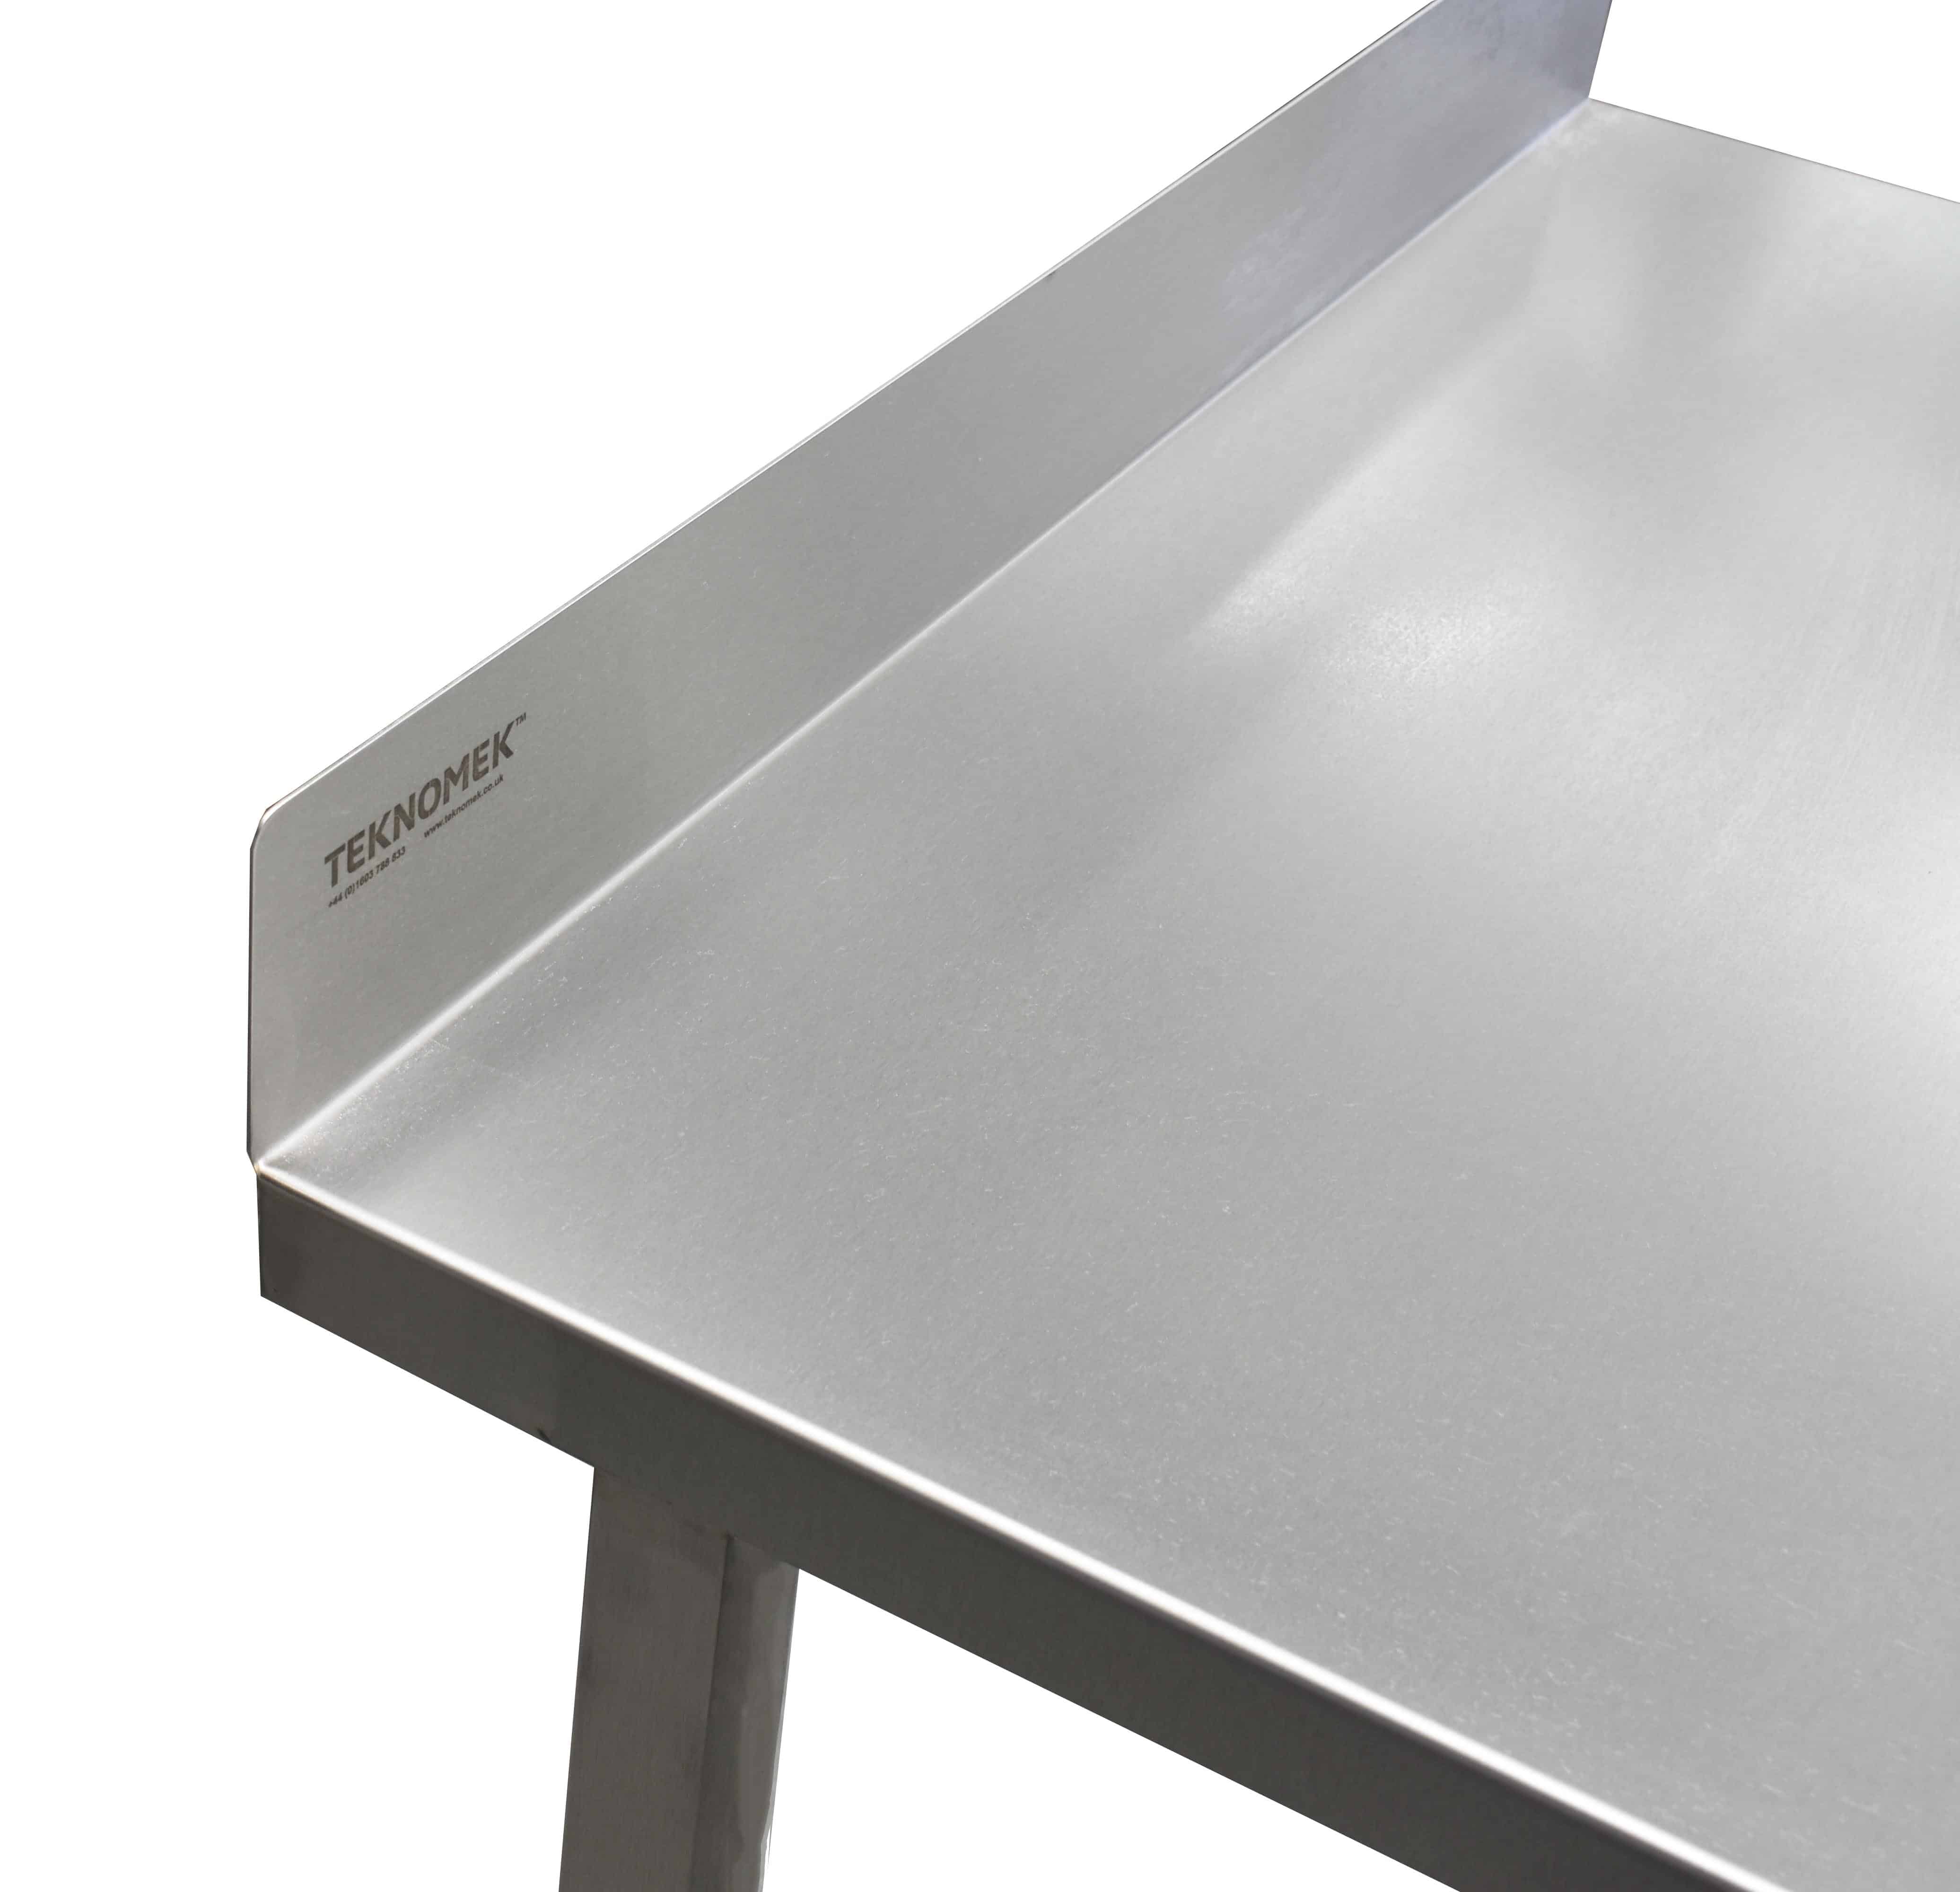 Stainless steel heavy duty table with undershelf